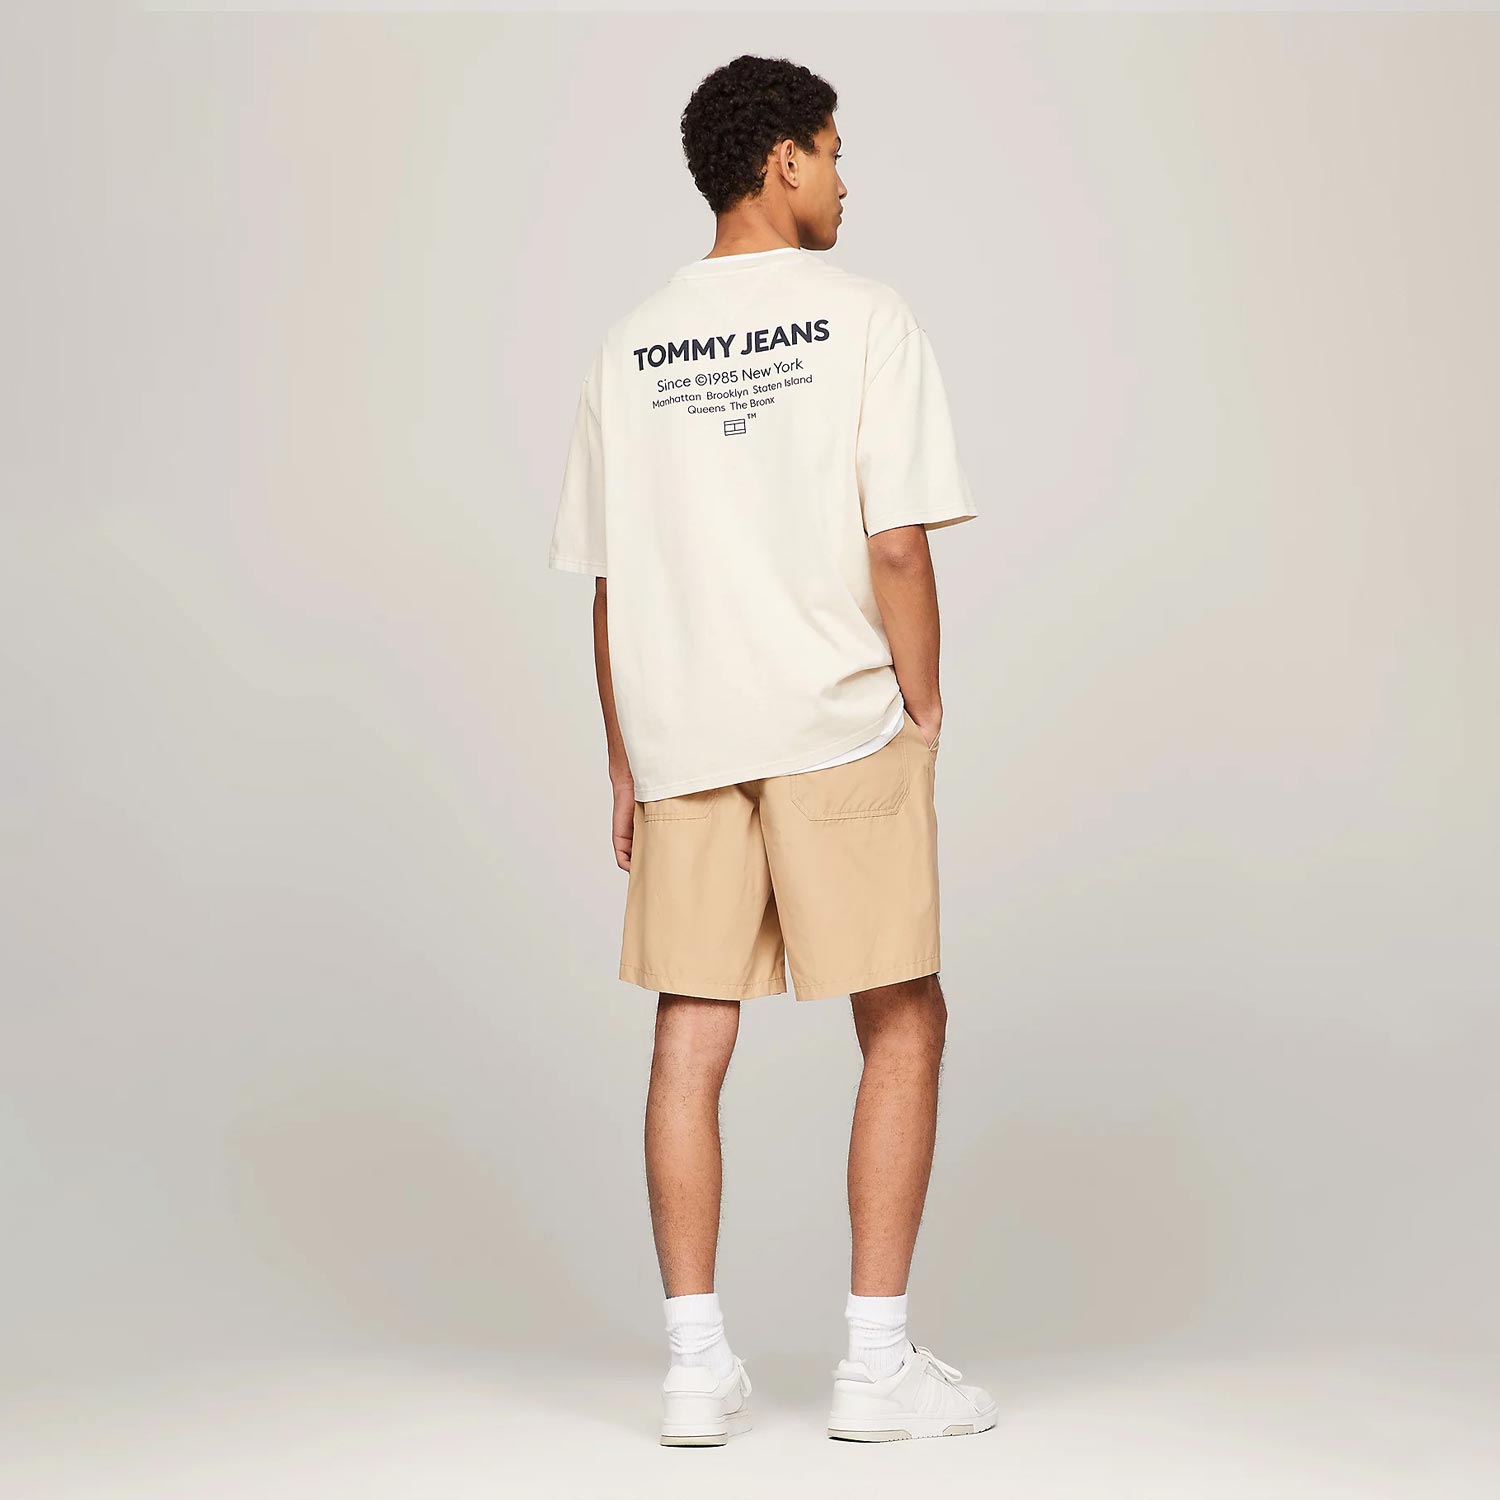 Tommy Jeans Washed Essential Regular Fit Short Sleeve Tee - Newsprint